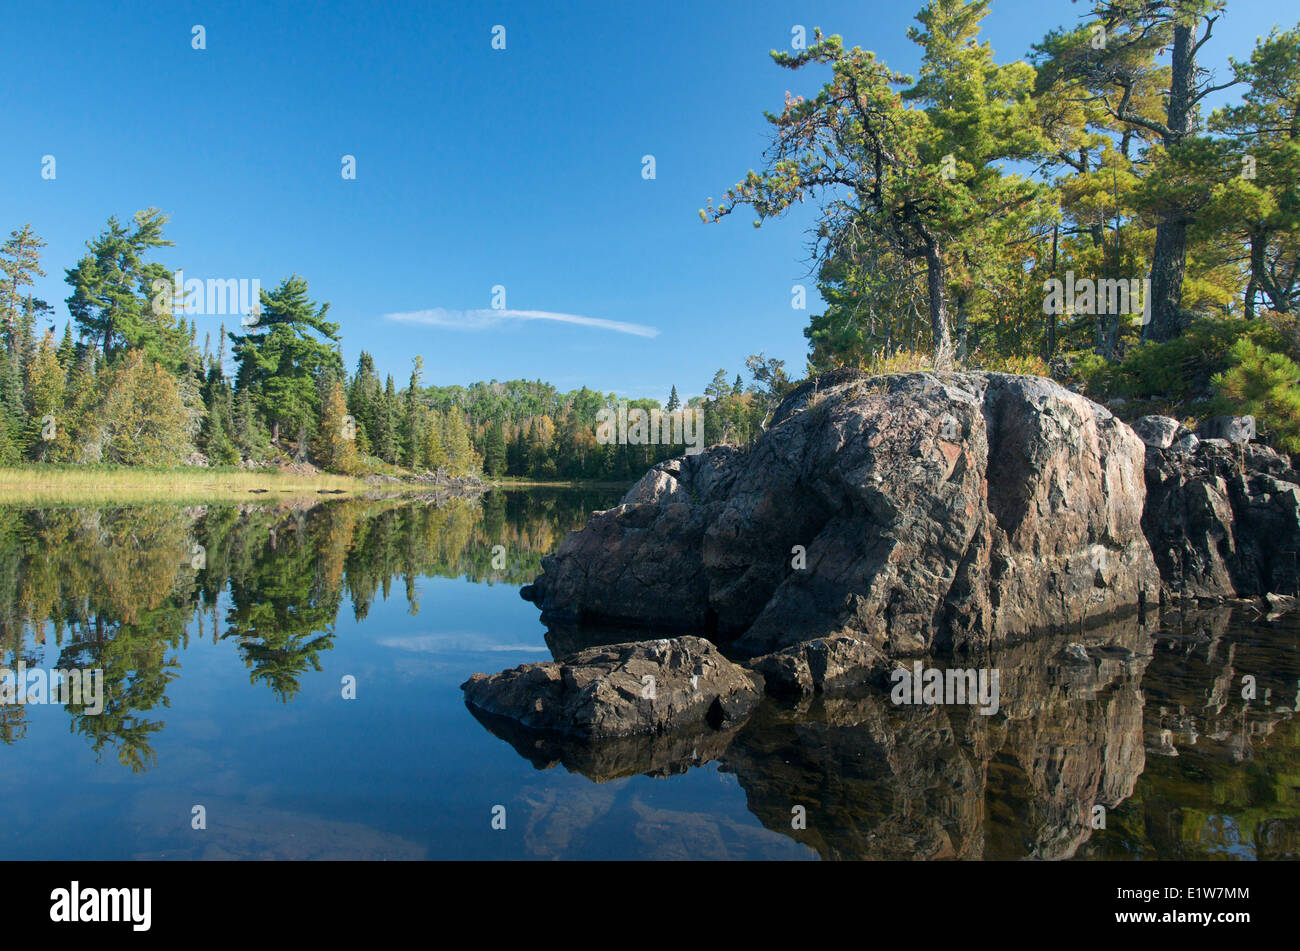 Lake, boreal forest and island of Canadian Shield rock in Quetico Provincial Park, Ontario, Canada Stock Photo